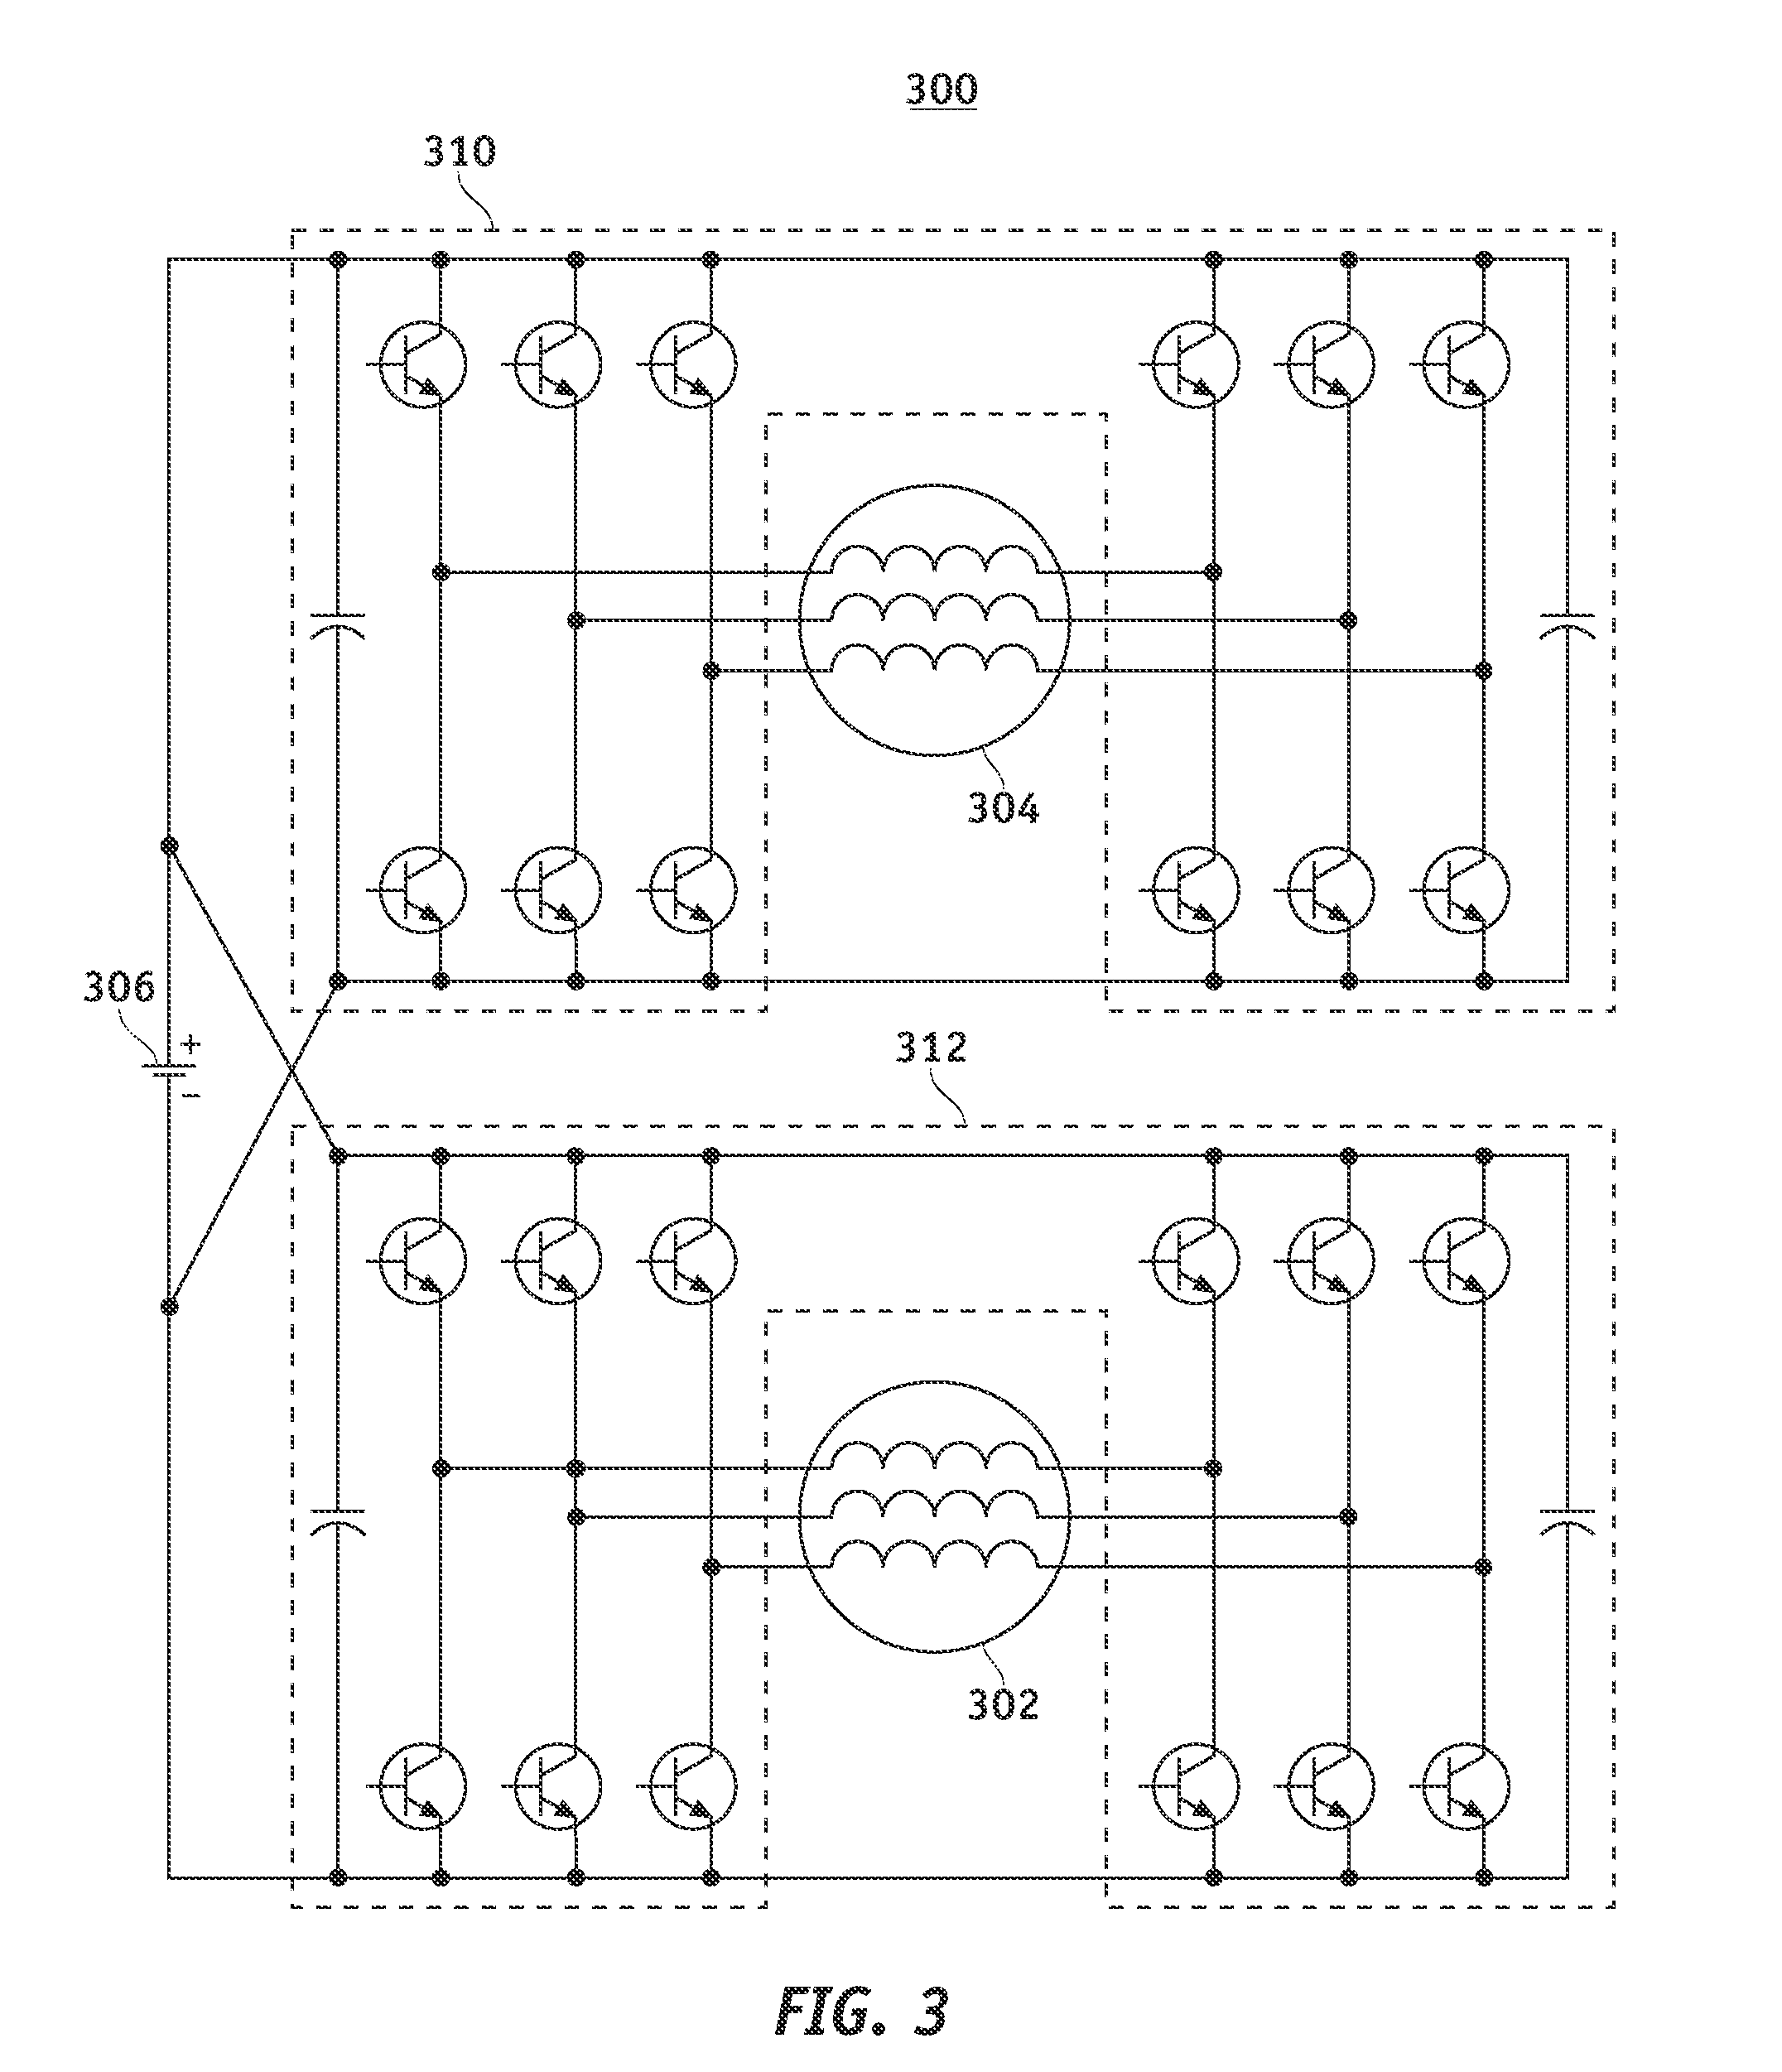 Inverter topology for an electric motor